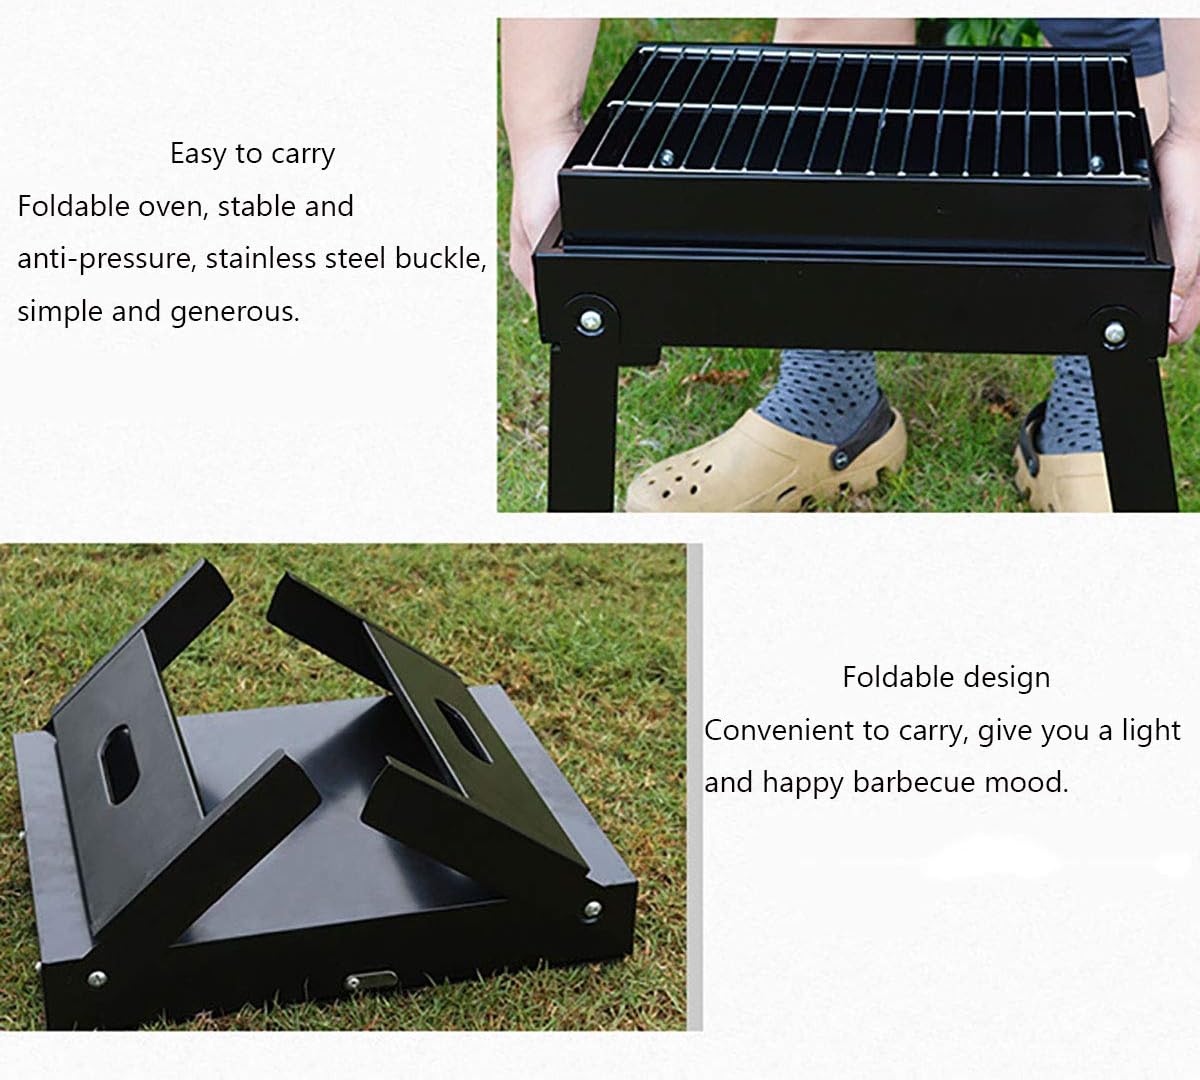 38x30x27cm Portable Folding Braai Stand with Deep Charcoal Pit - FX-9203